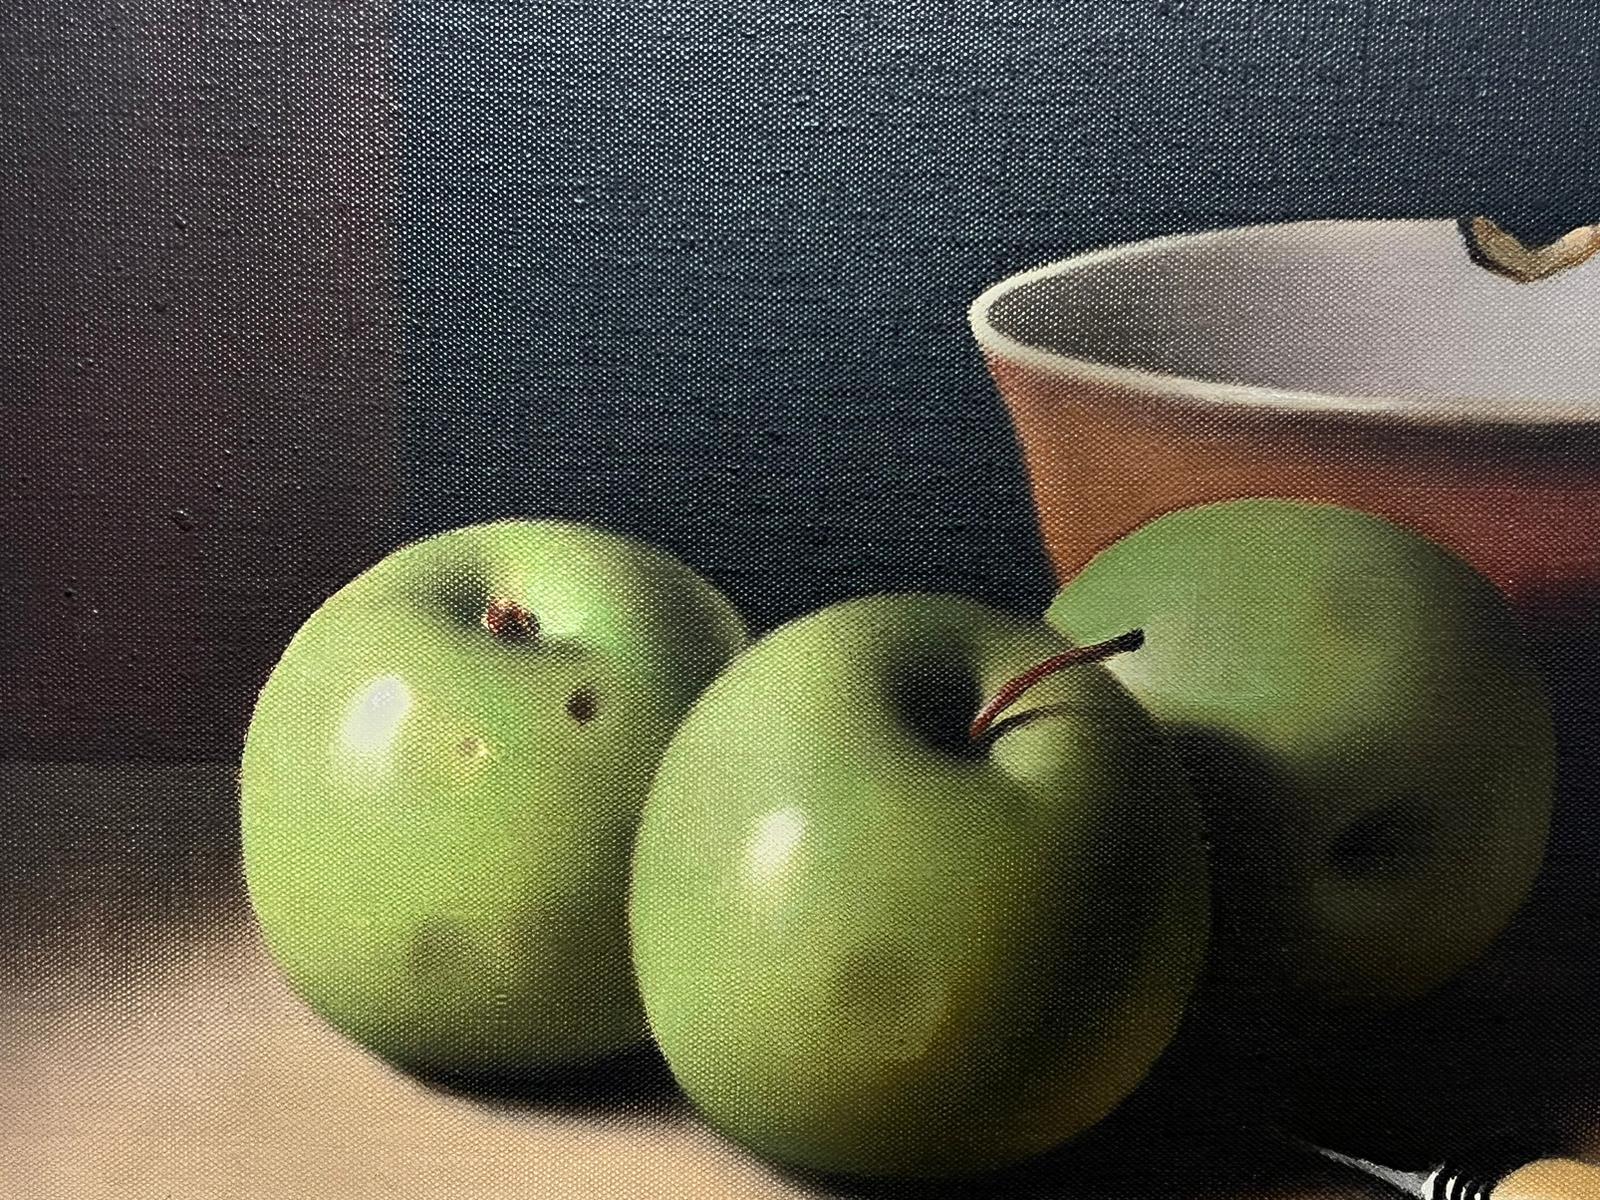 Still Life With Apples
Christopher Cawthorn (British 20th Century)
signed oil painting on canvas, framed
framed: 21.5 x 25.5 inches
canvas: 16 x 20 inches
provenance: private collection, England 
condition: very good and sound condition 
